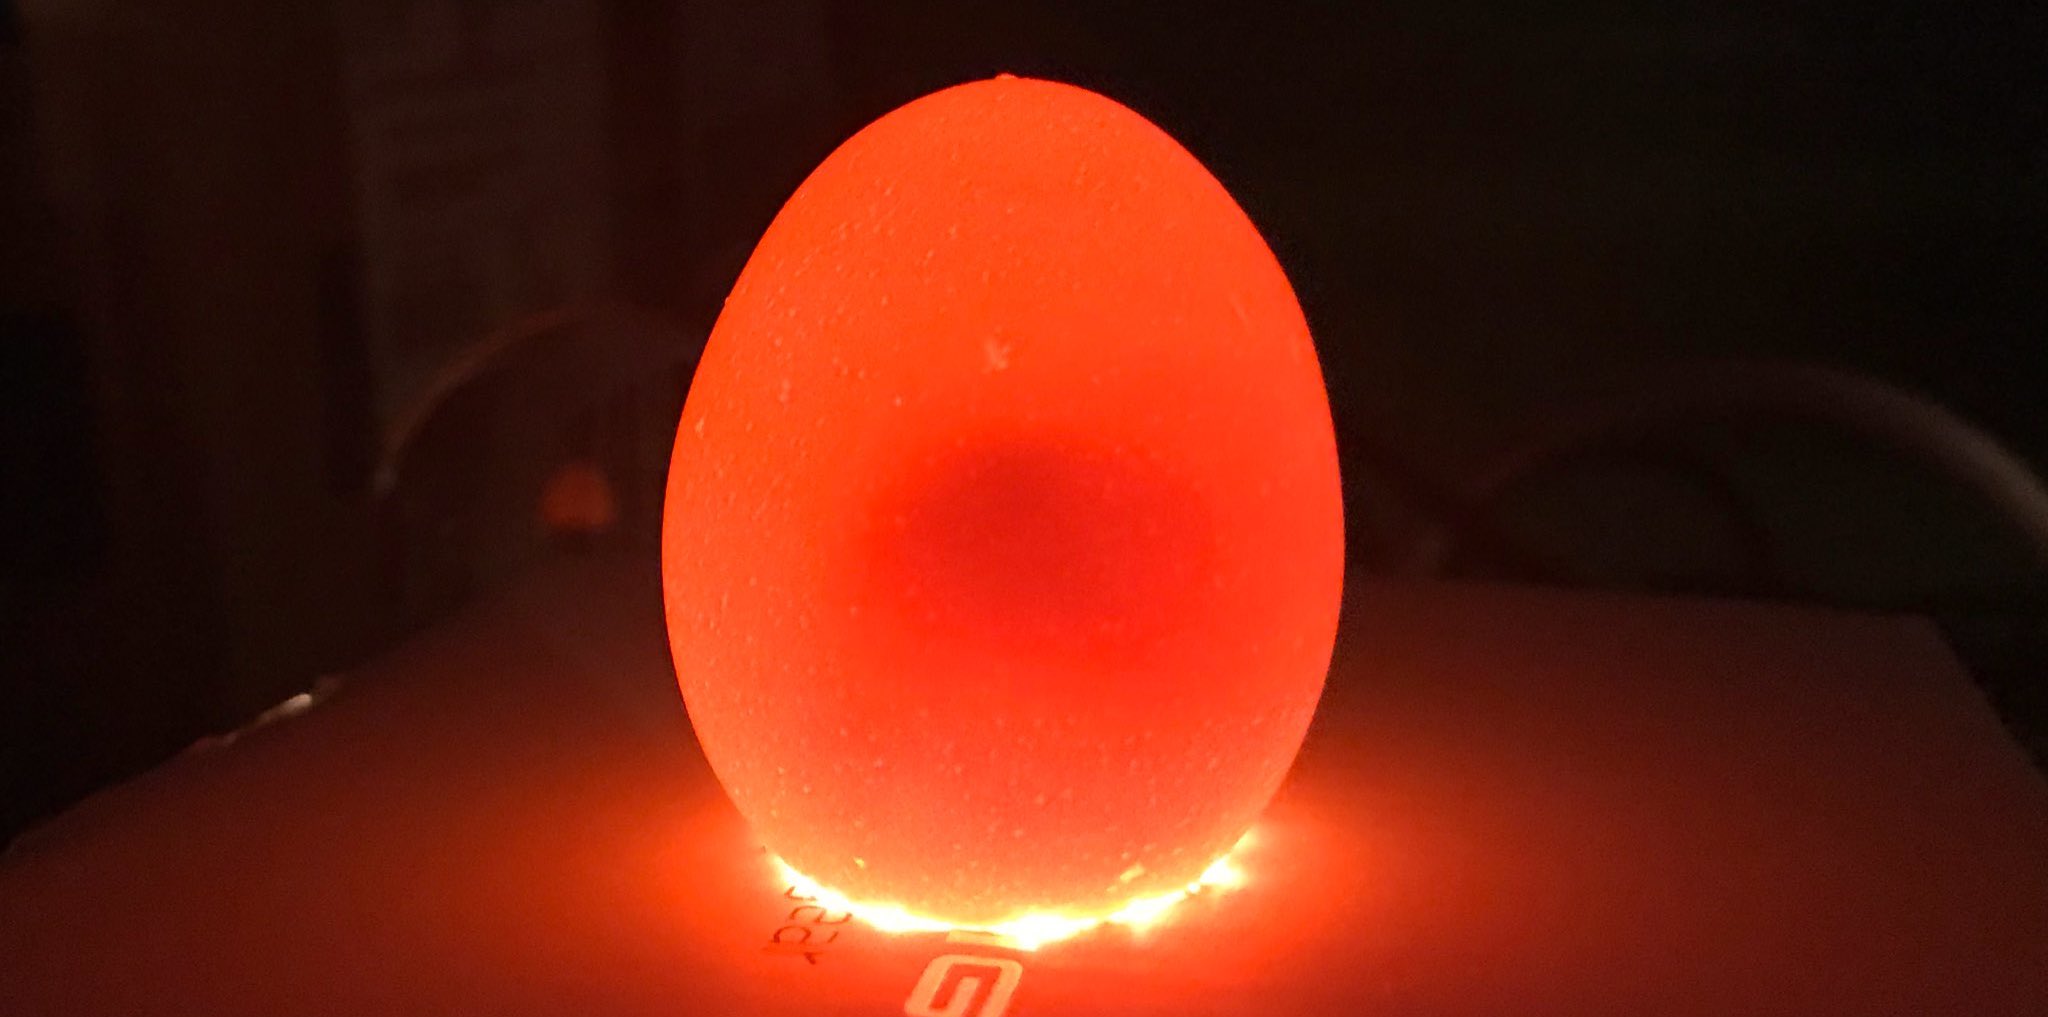 Candling an egg to view the embryo inside